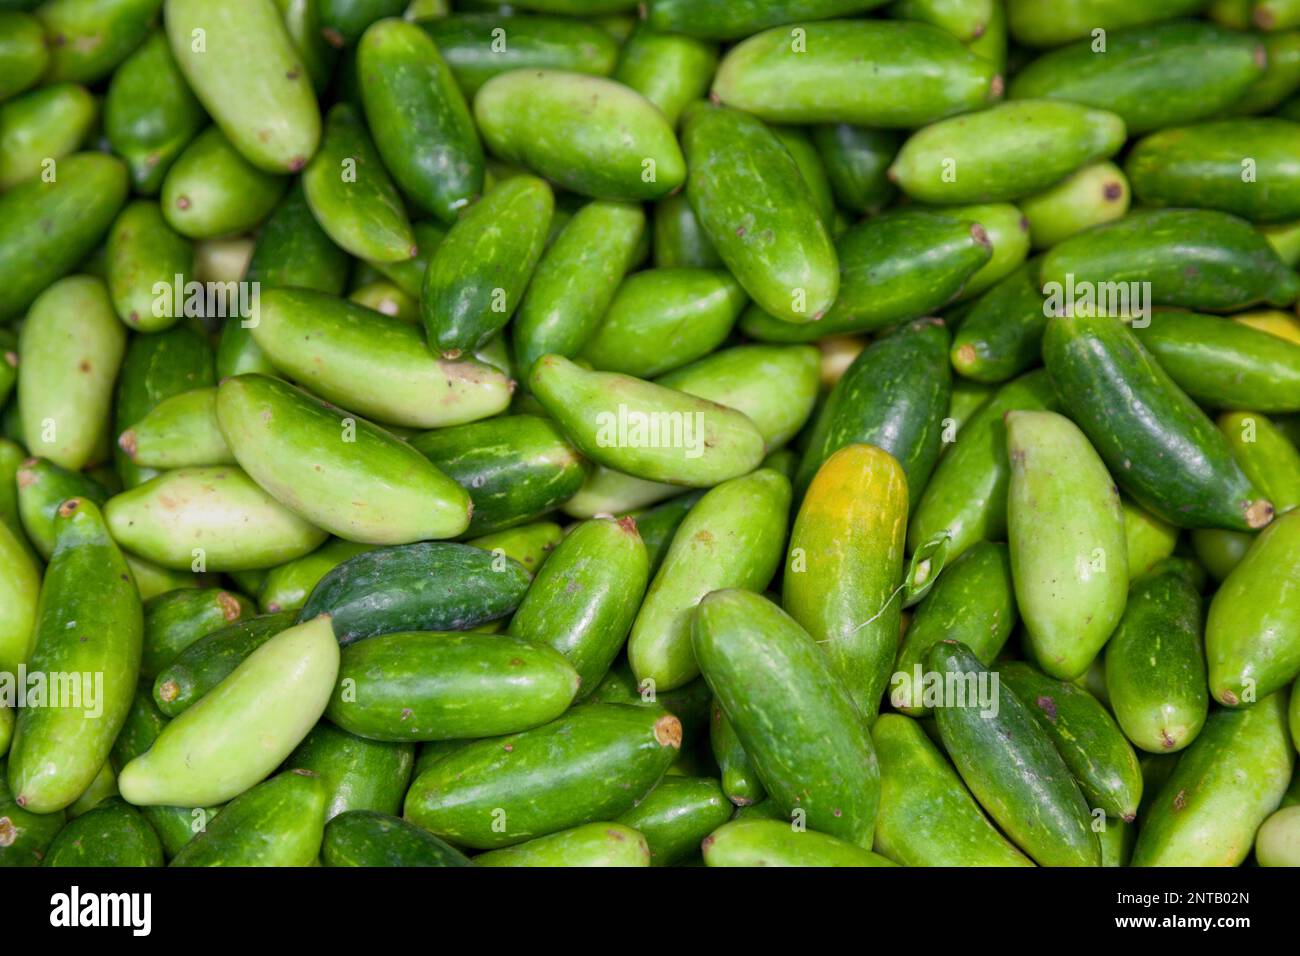 Close-up on a stack of Indian Tendli for sale on a market stall. Stock Photo